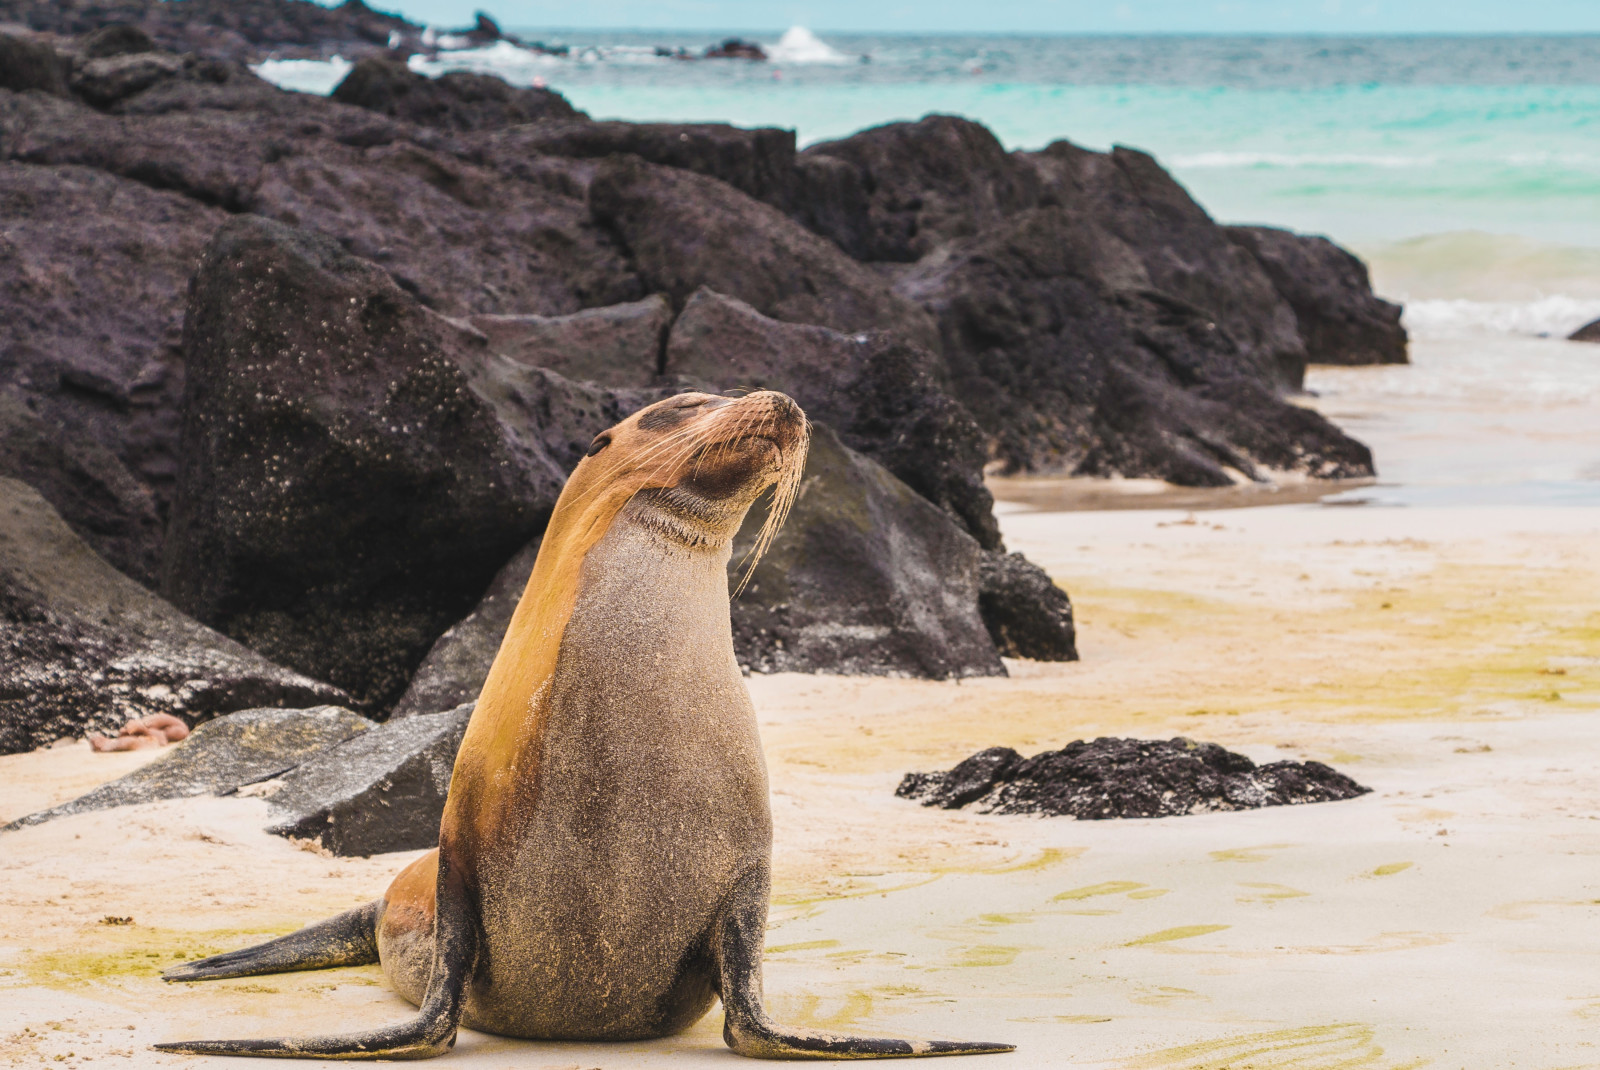 Sea Lion on the beach by the rocks with the ocean in the background in the Galapagos Islands